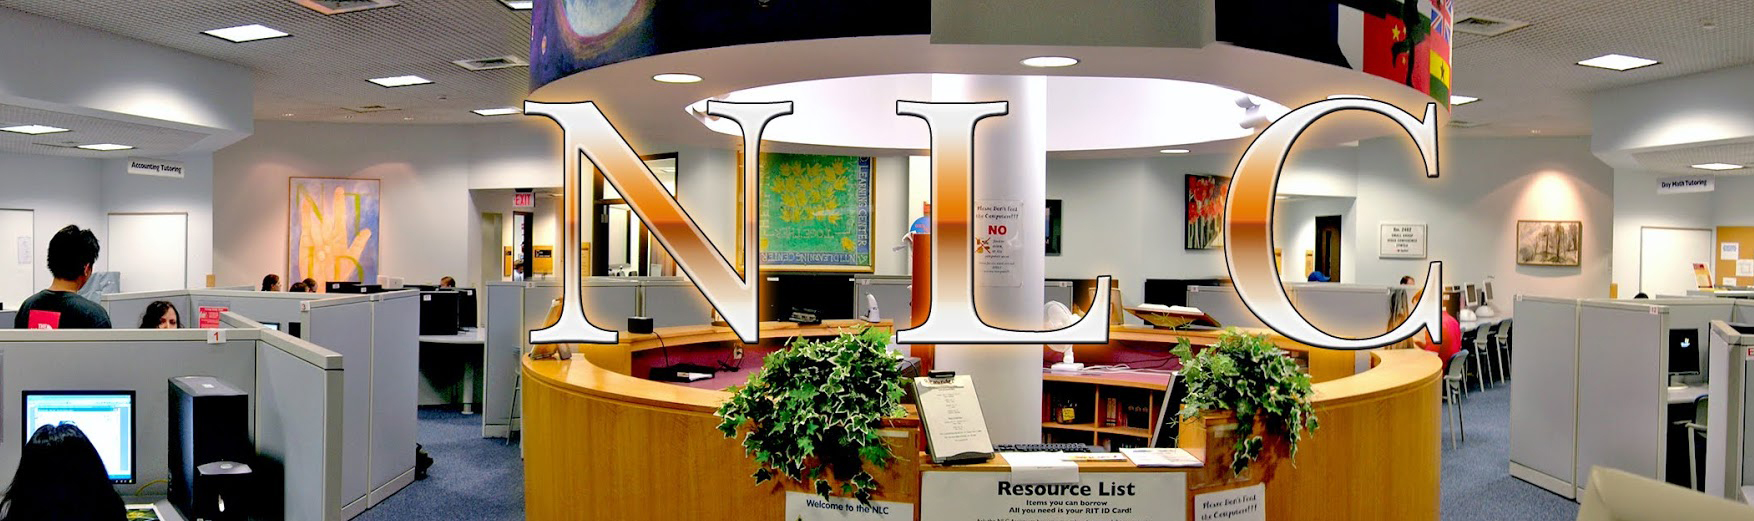 photo of the round info booth at the NLC